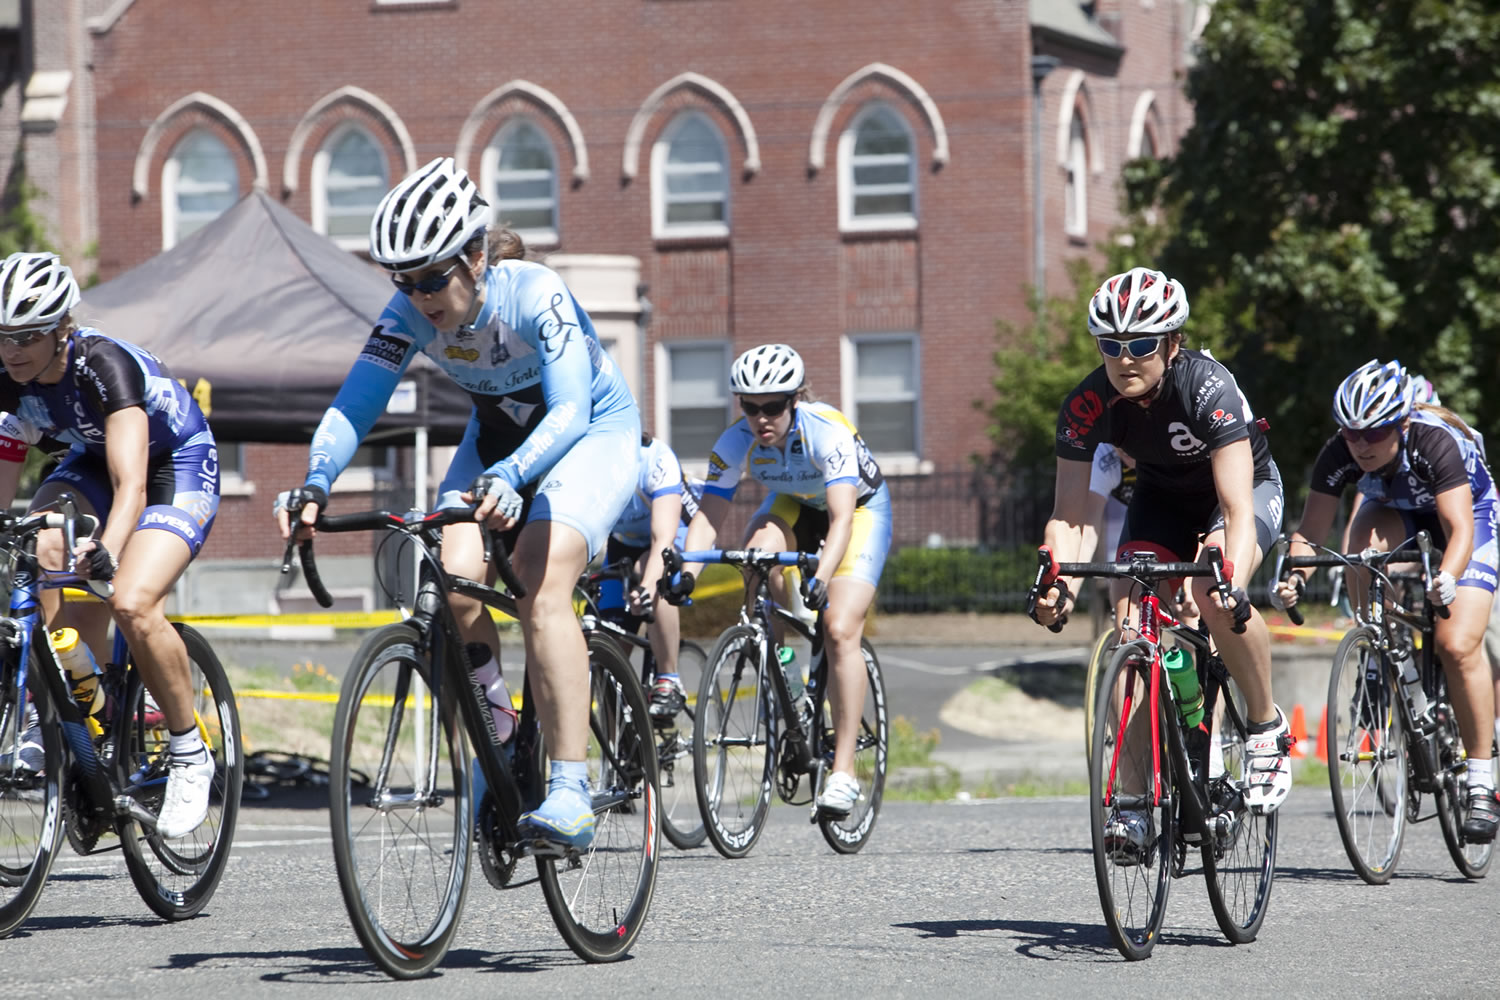 Senior Women race through downtown Vancouver during the sixth annual Courthouse Criterium bike race in 2011.